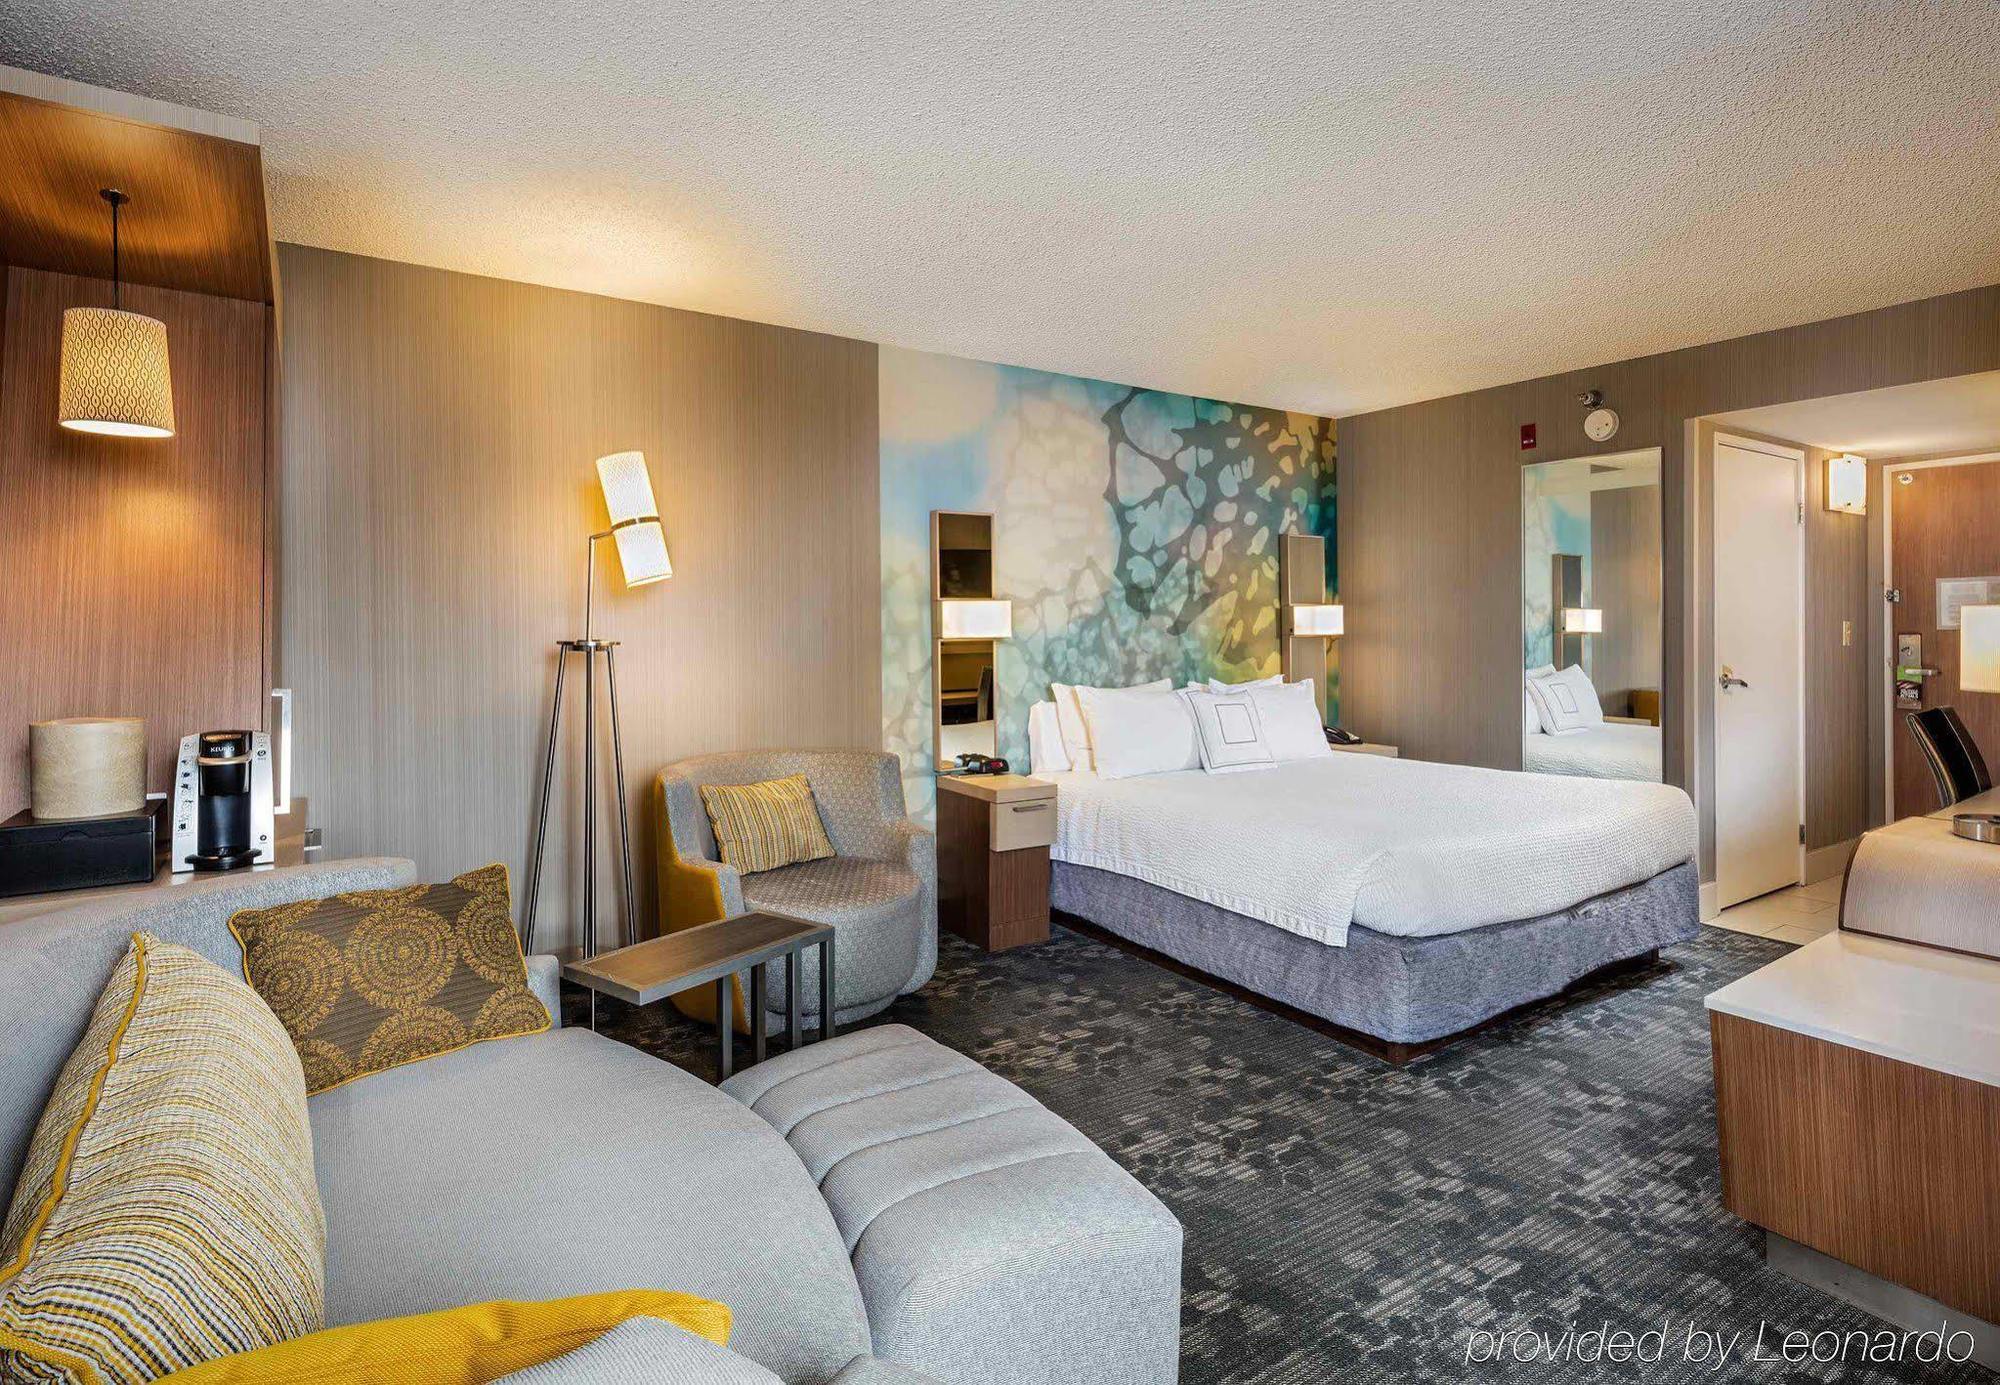 Courtyard By Marriott Riverside Ucr/Moreno Valley Area Room photo